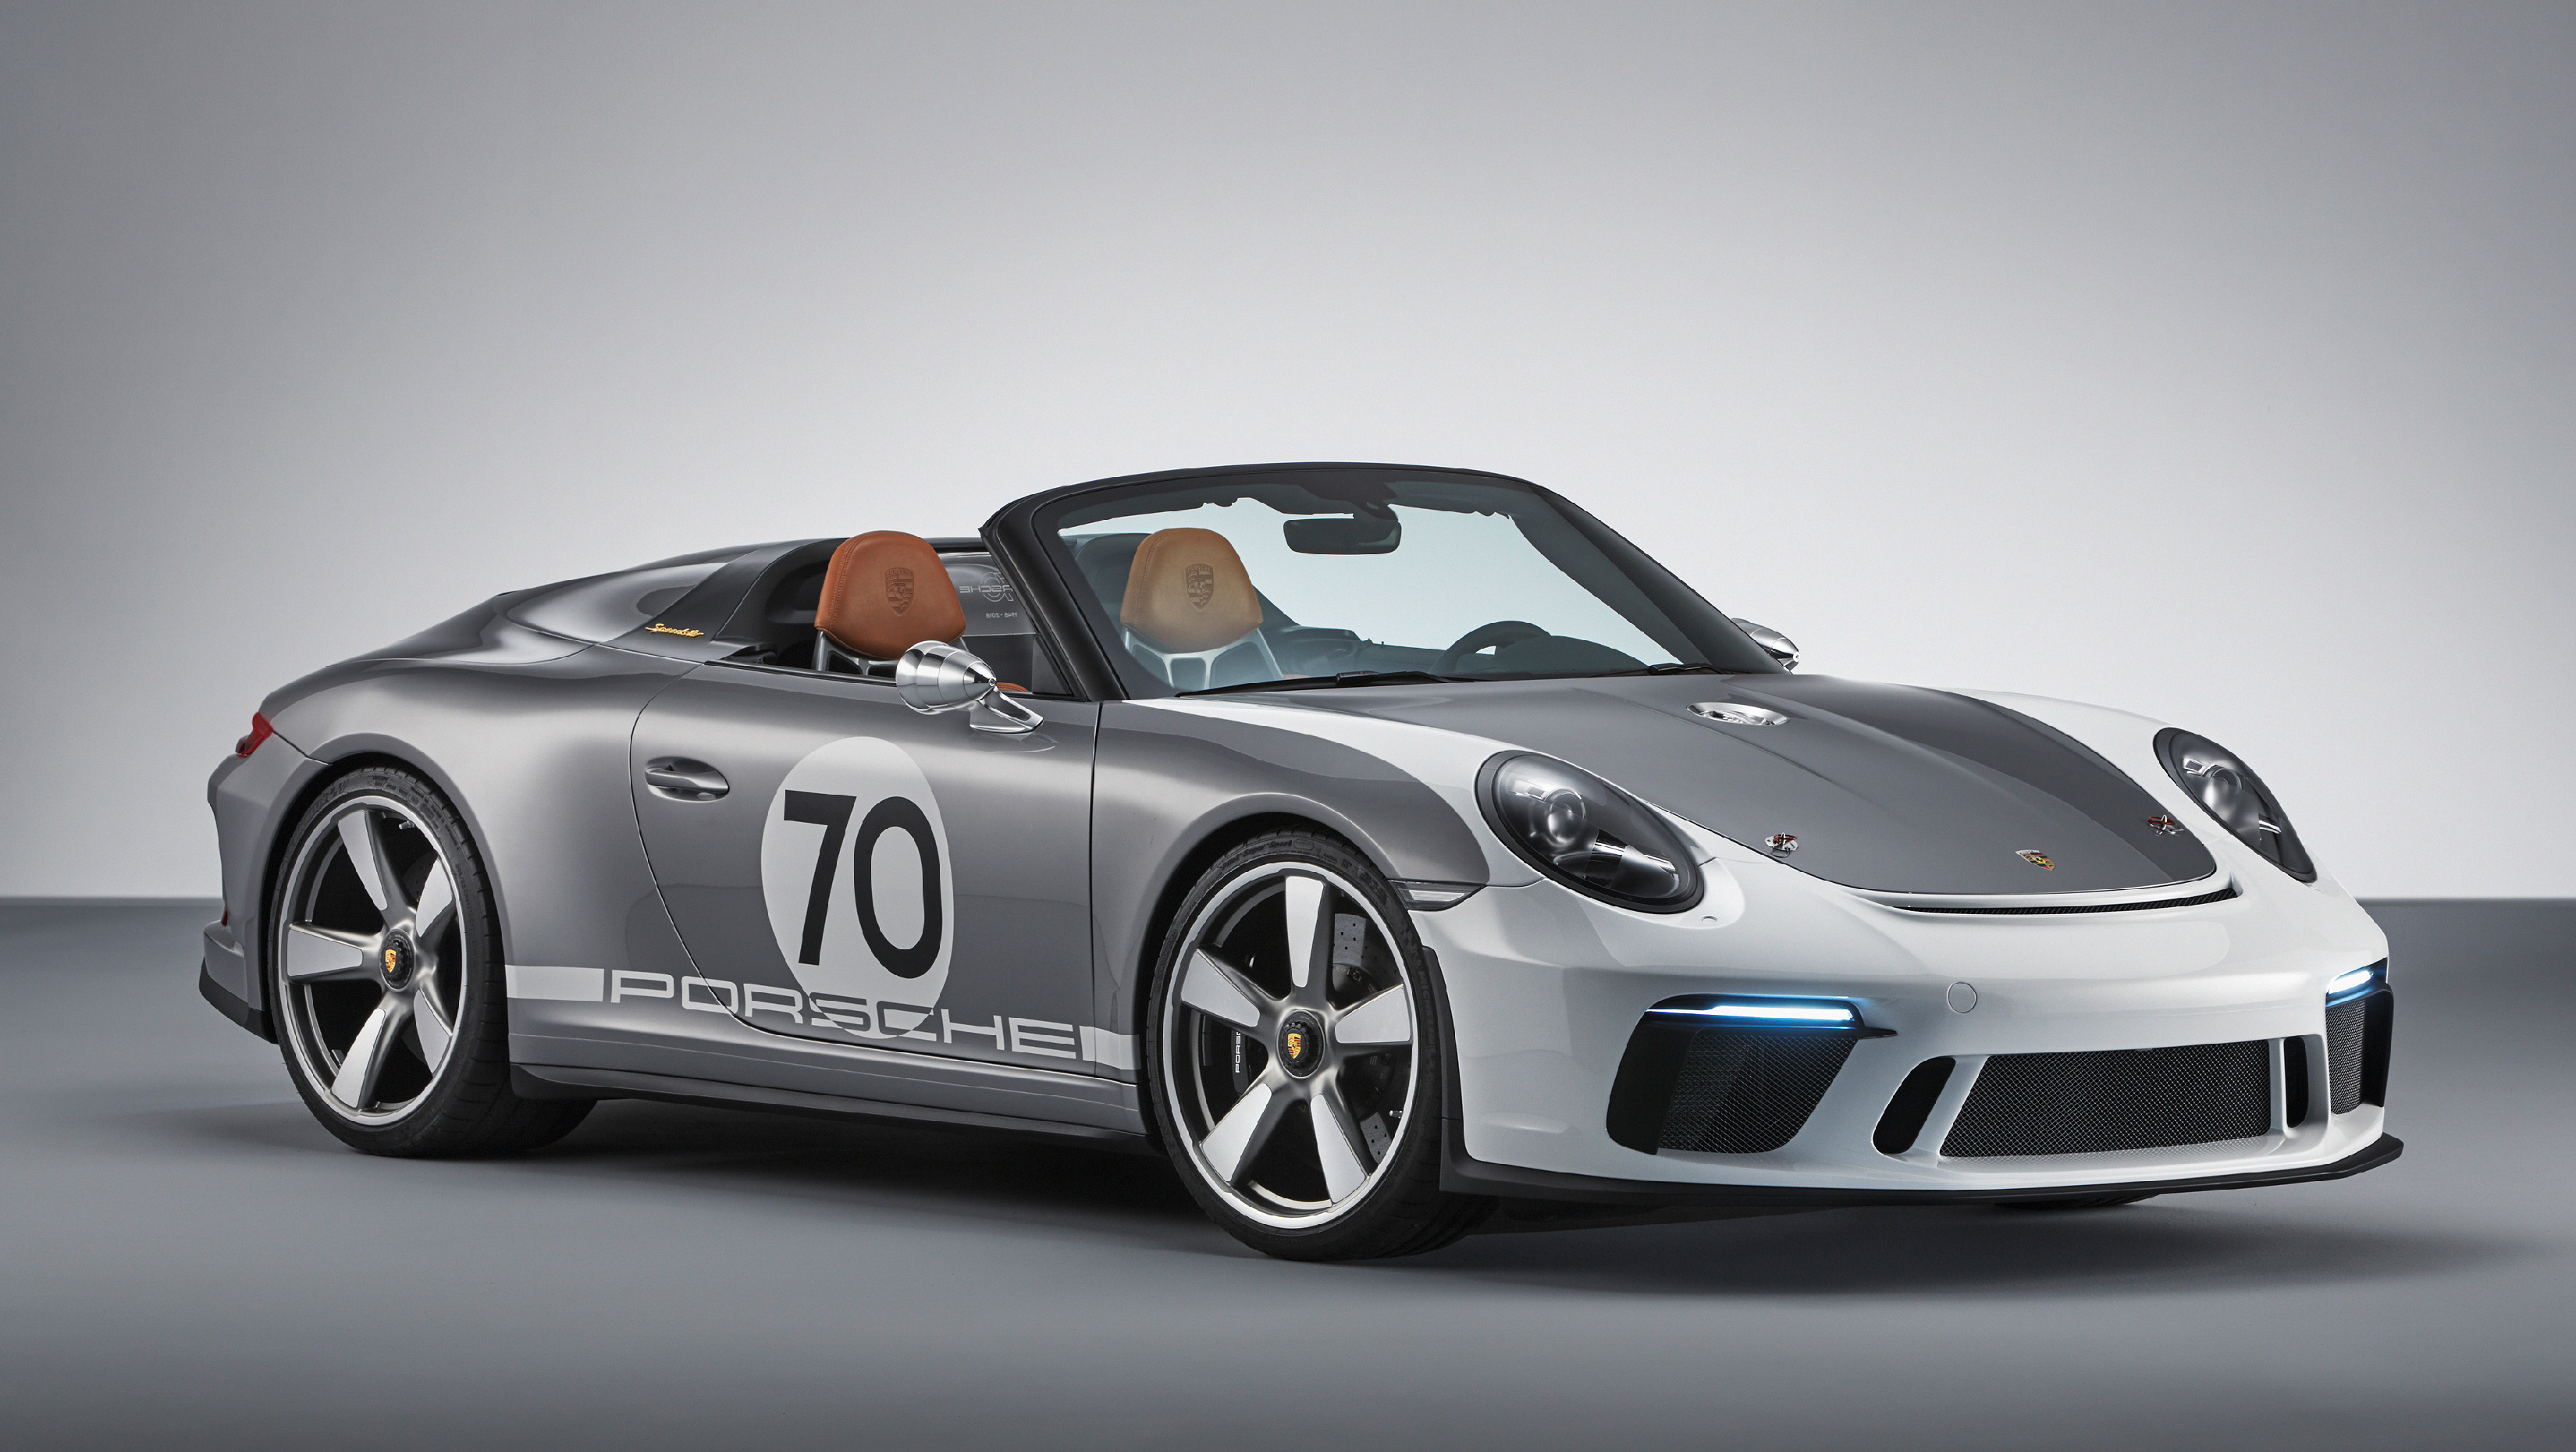 500hp porsche 911 speedster coming in 2019 as limited edition model 3658158 concept 2018 ag